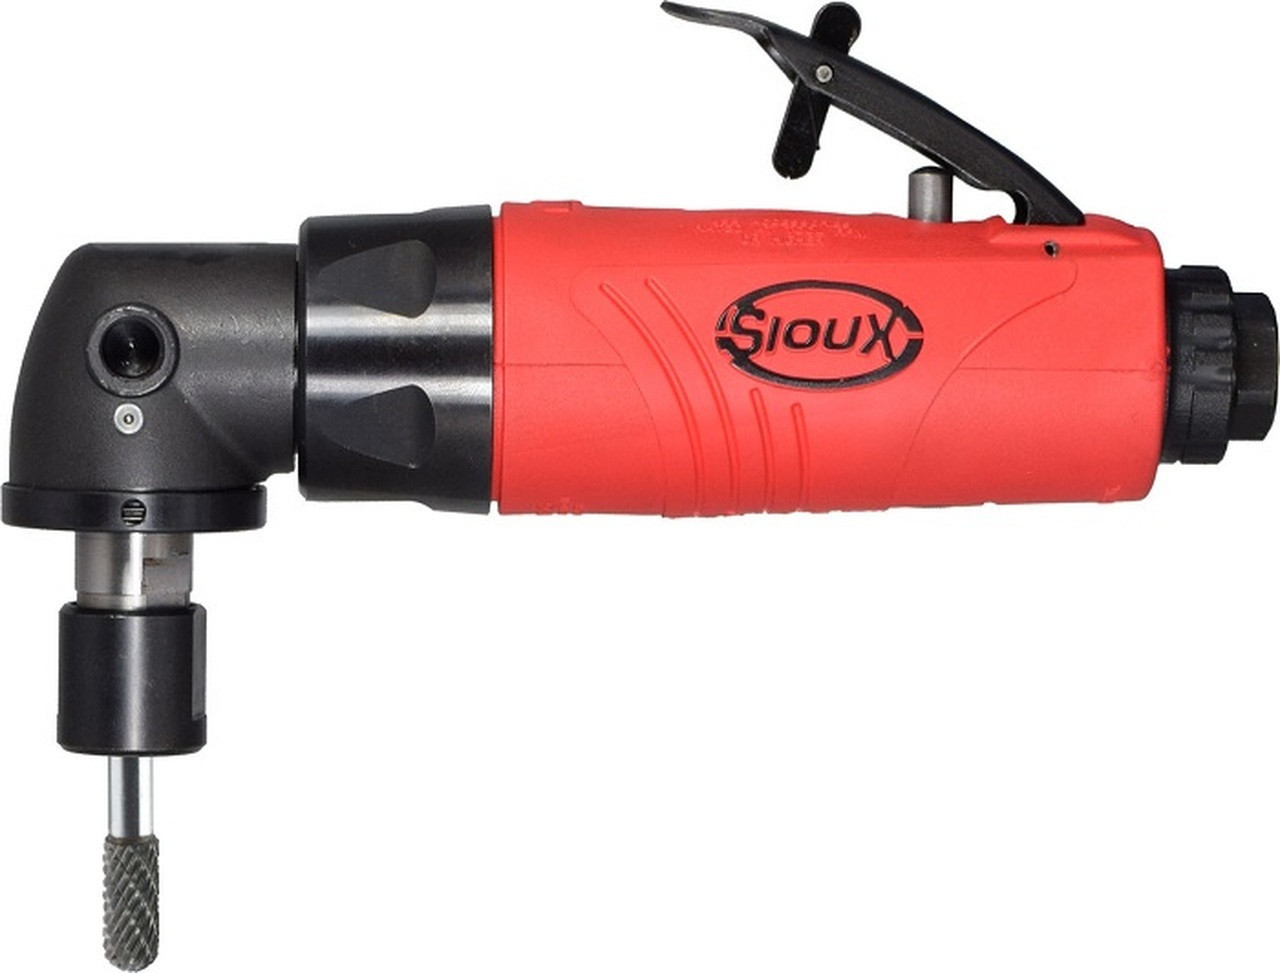 Sioux Tools SAG05S15M6 Right Angle Die Grinder or 0.5 HP or 15000 RPM or 200 Series Collet or Rear Exhaust